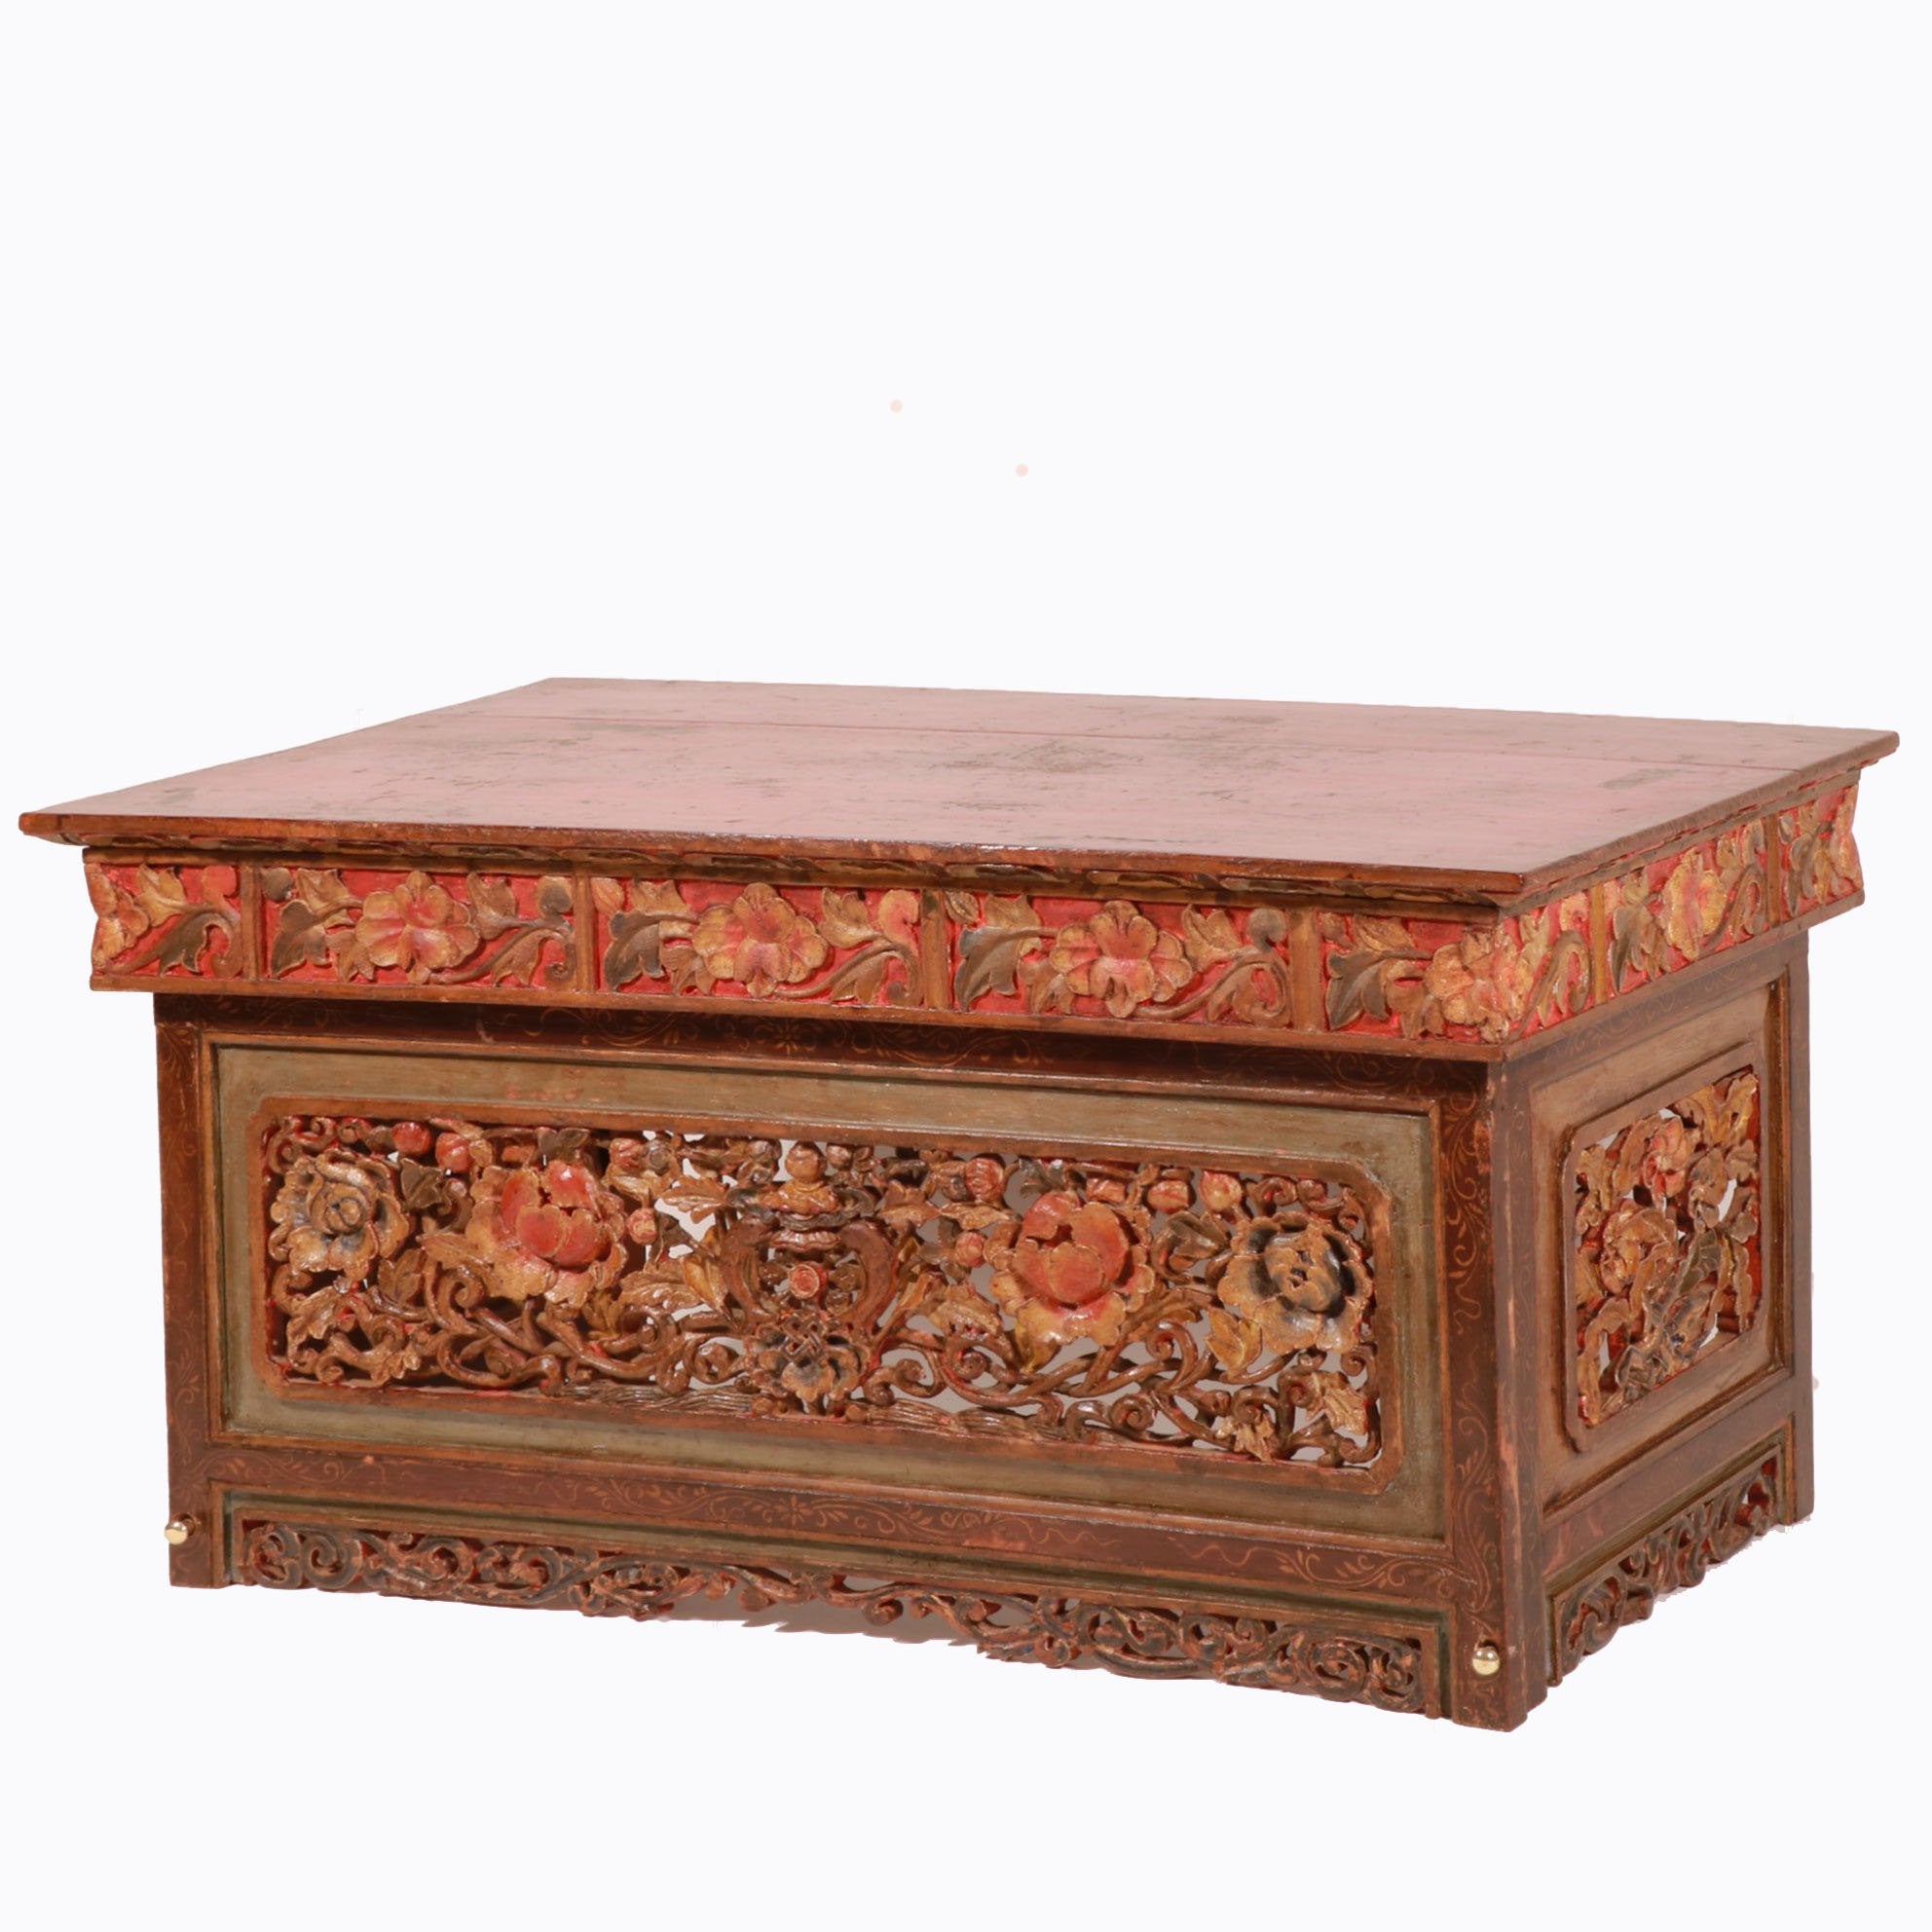 Painted & Carved Choksar - Prayer Table from Tibet | Indigo Oriental Antiques